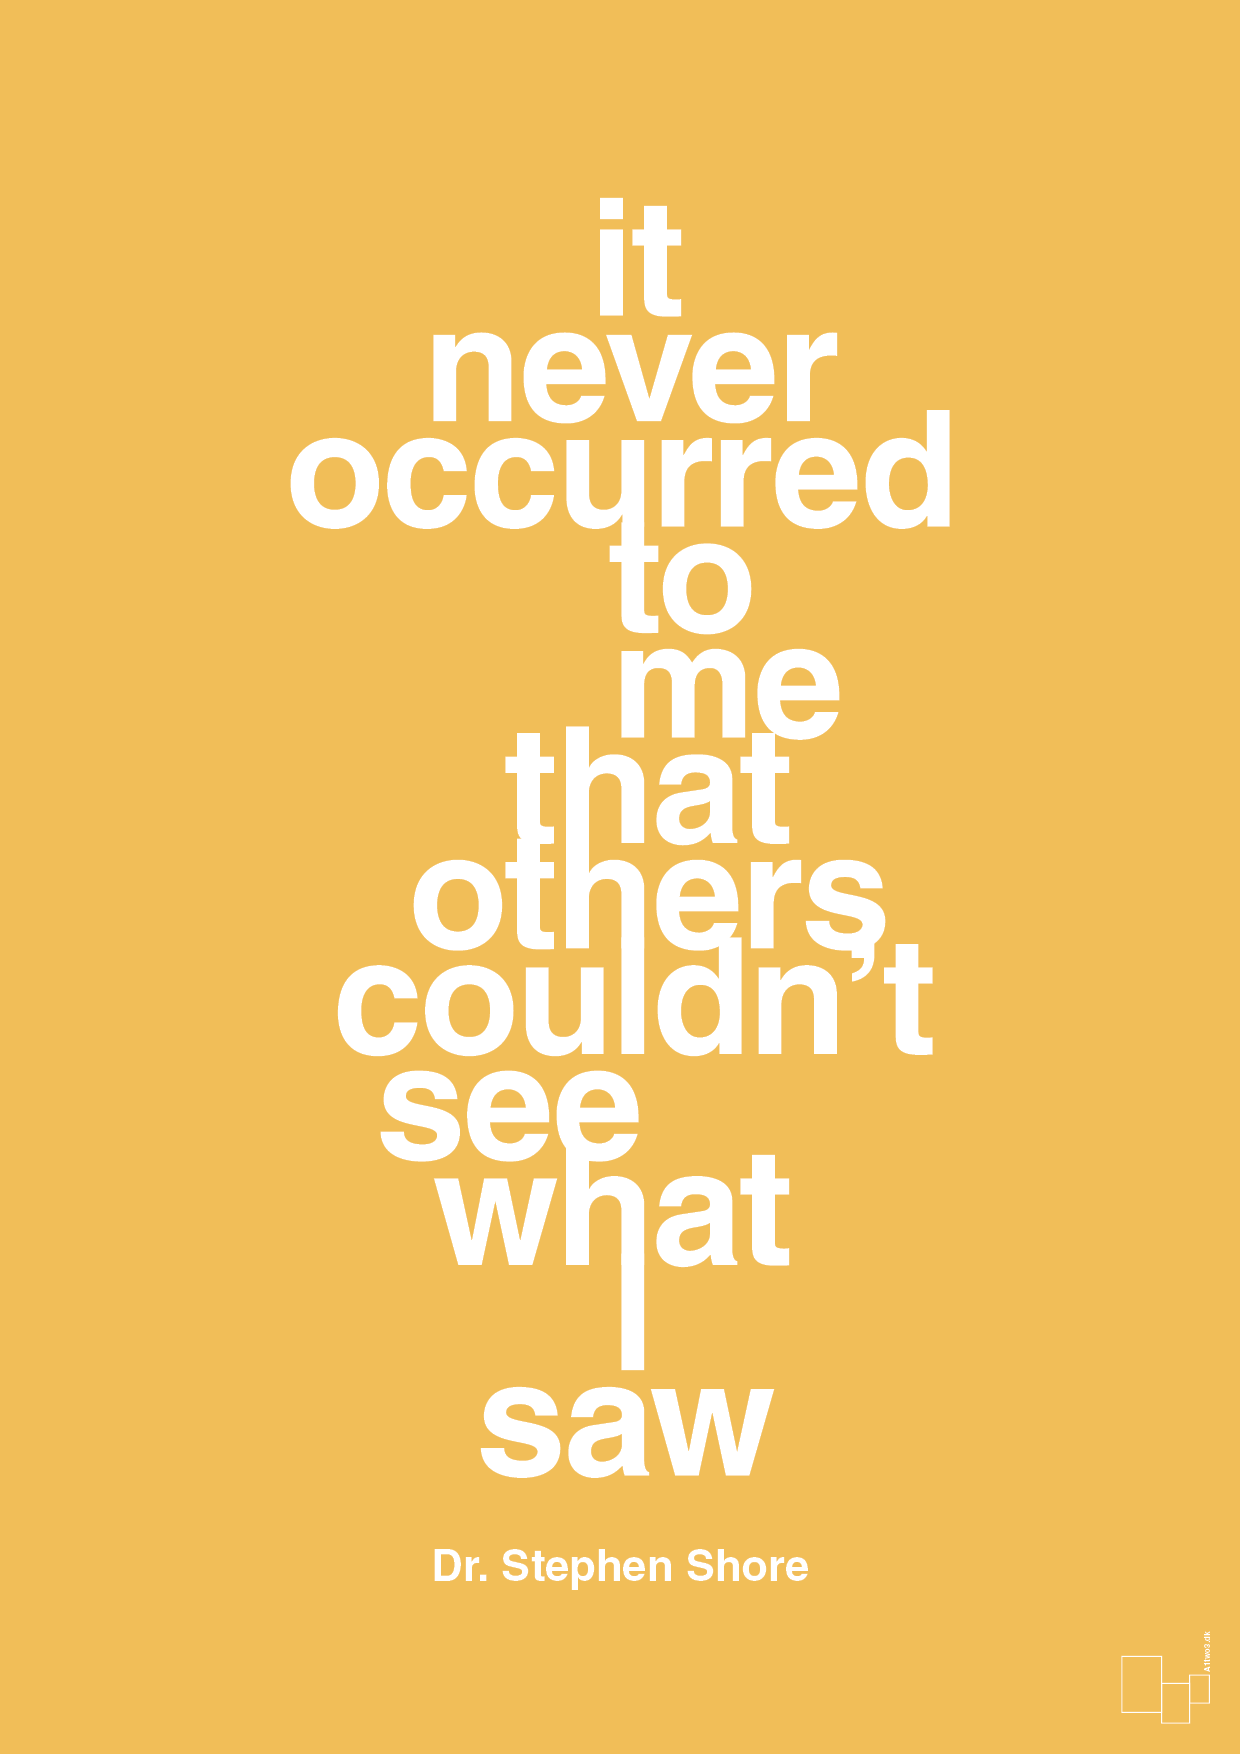 it never occurred to me that others couldn’t see what I saw - Plakat med Samfund i Honeycomb